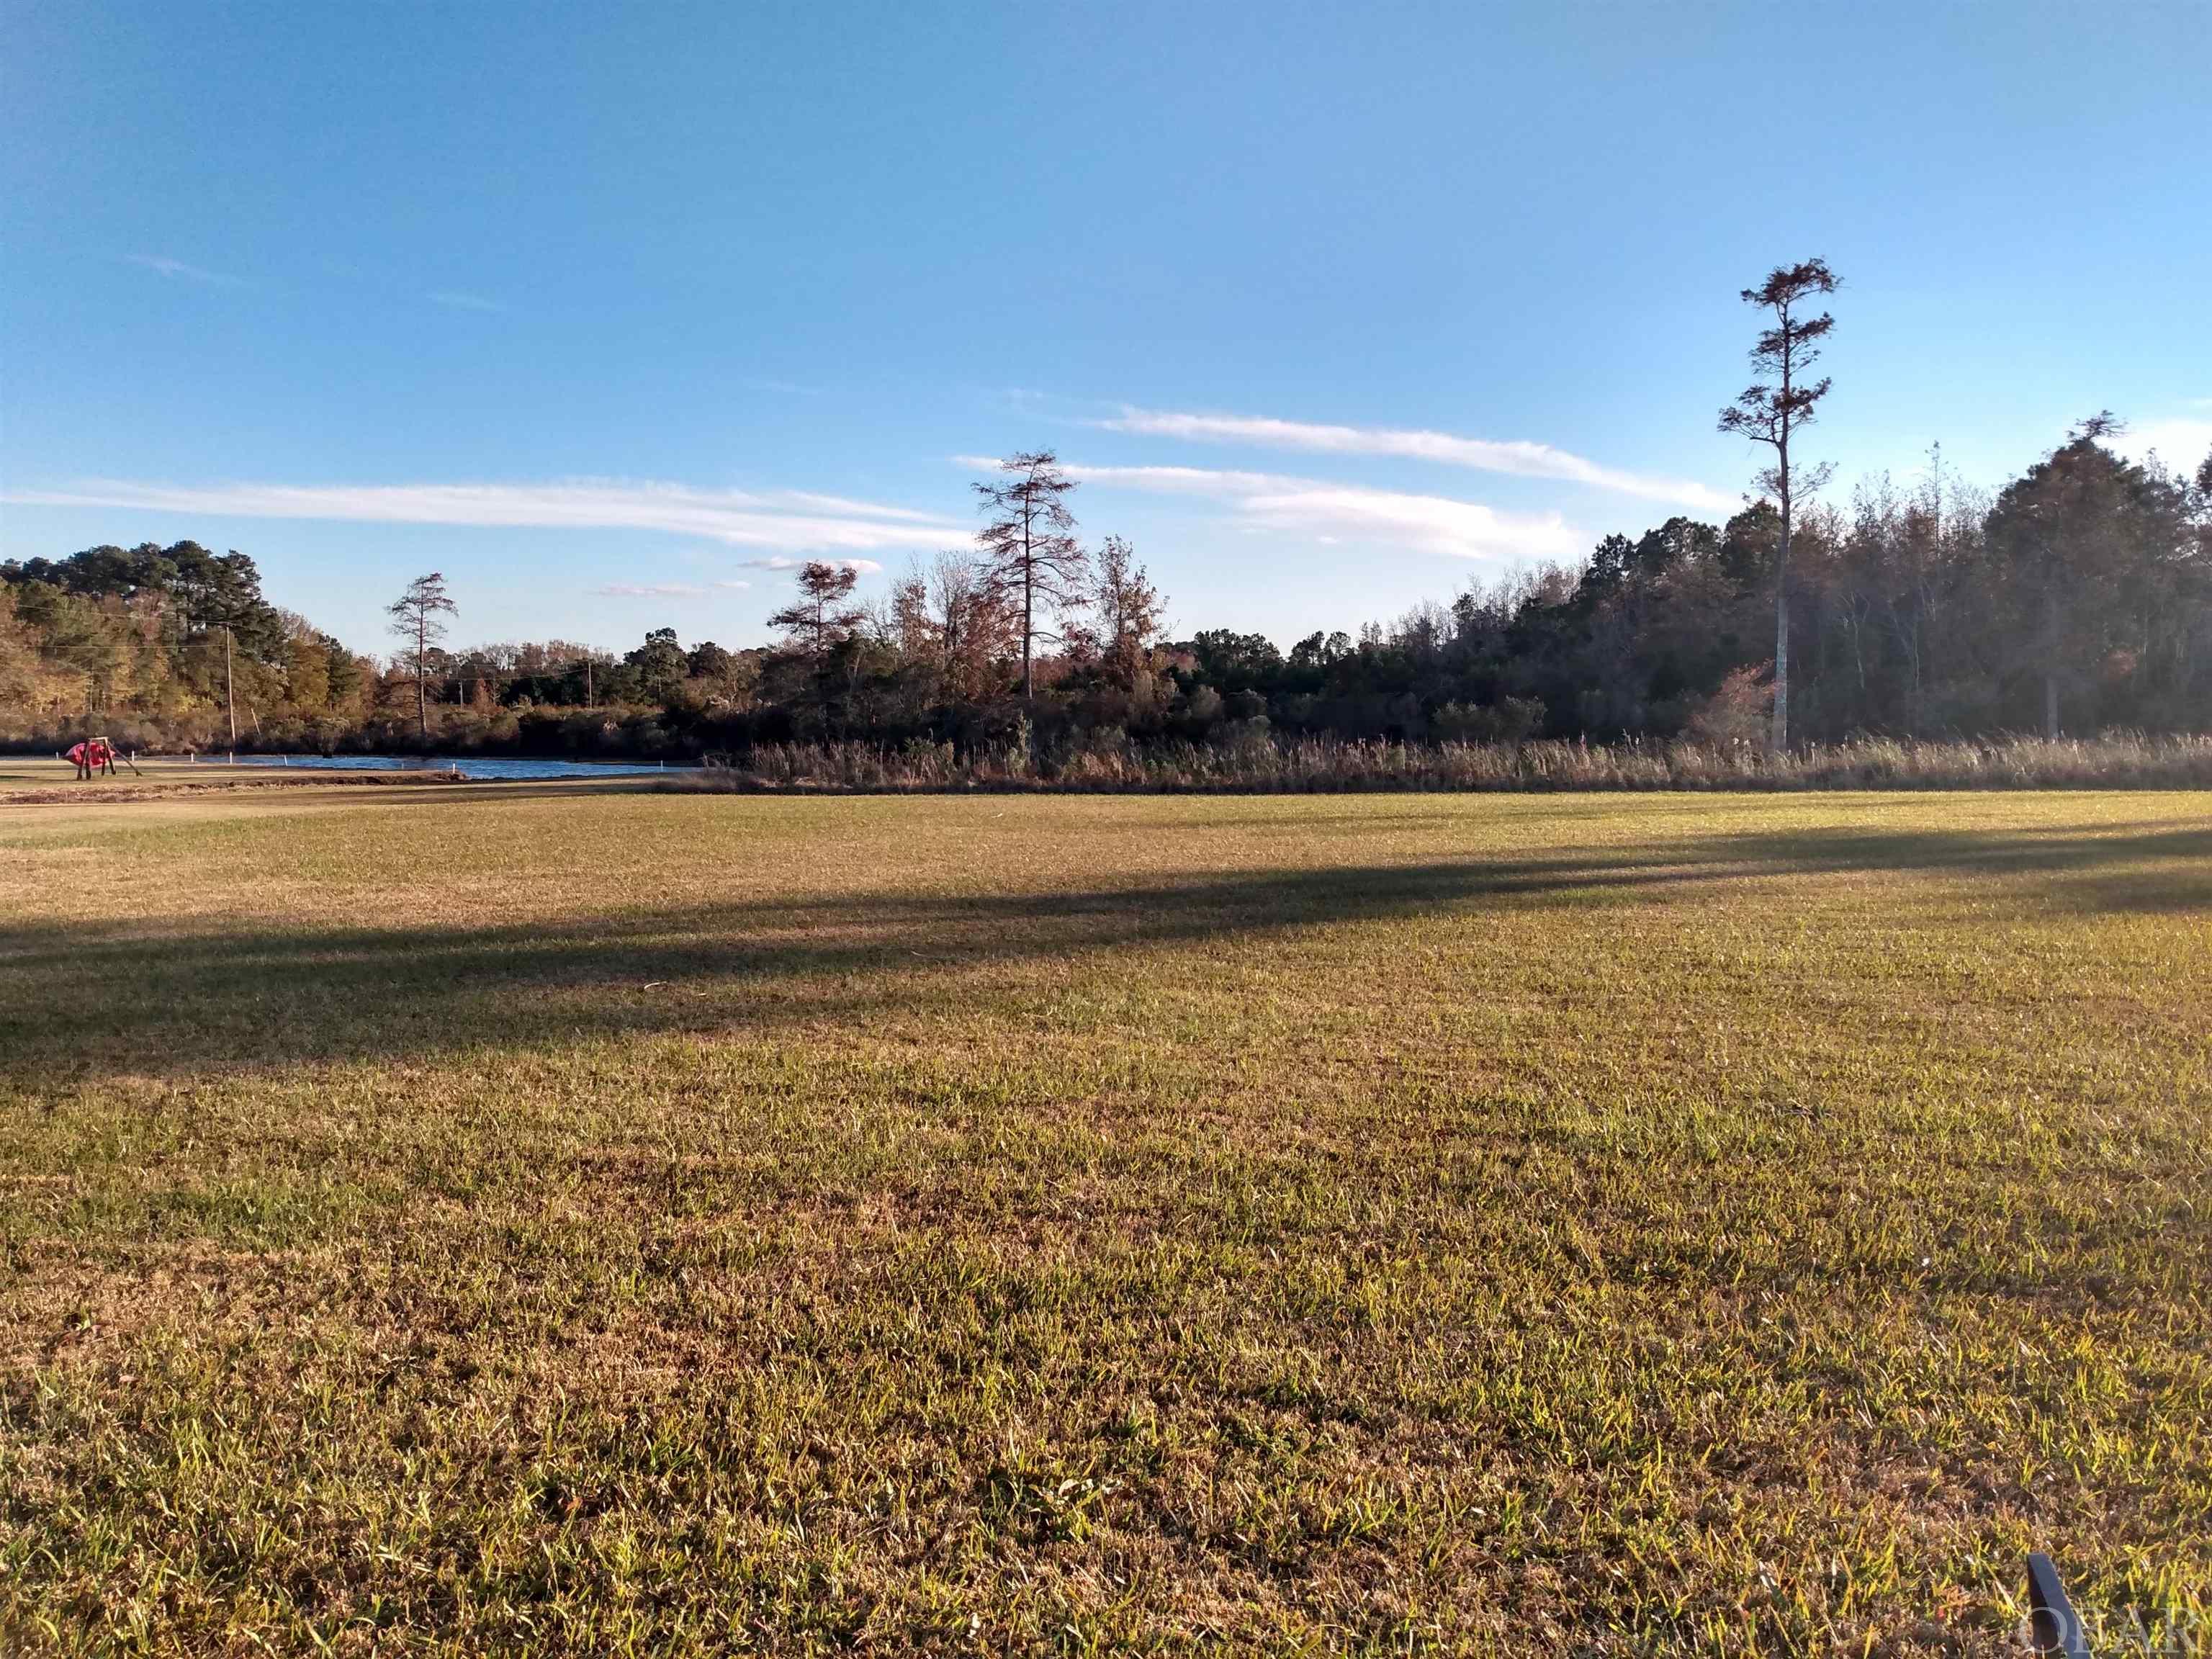 This canal lot provides spectacular views of the Albemarle Sound and gorgeous sunsets from the waterfront commons area! The rear of the lot is fronted by a canal navigable to the Albemarle Sound. The HOA and covenants have expired.  An adjacent canal lot is also for sale. Underground utilities and permit for septic system available. Located just 5 miles north of Columbia, N.C. and within an hour of Nags Head, N. C.! Priced to sell at only $27,500!